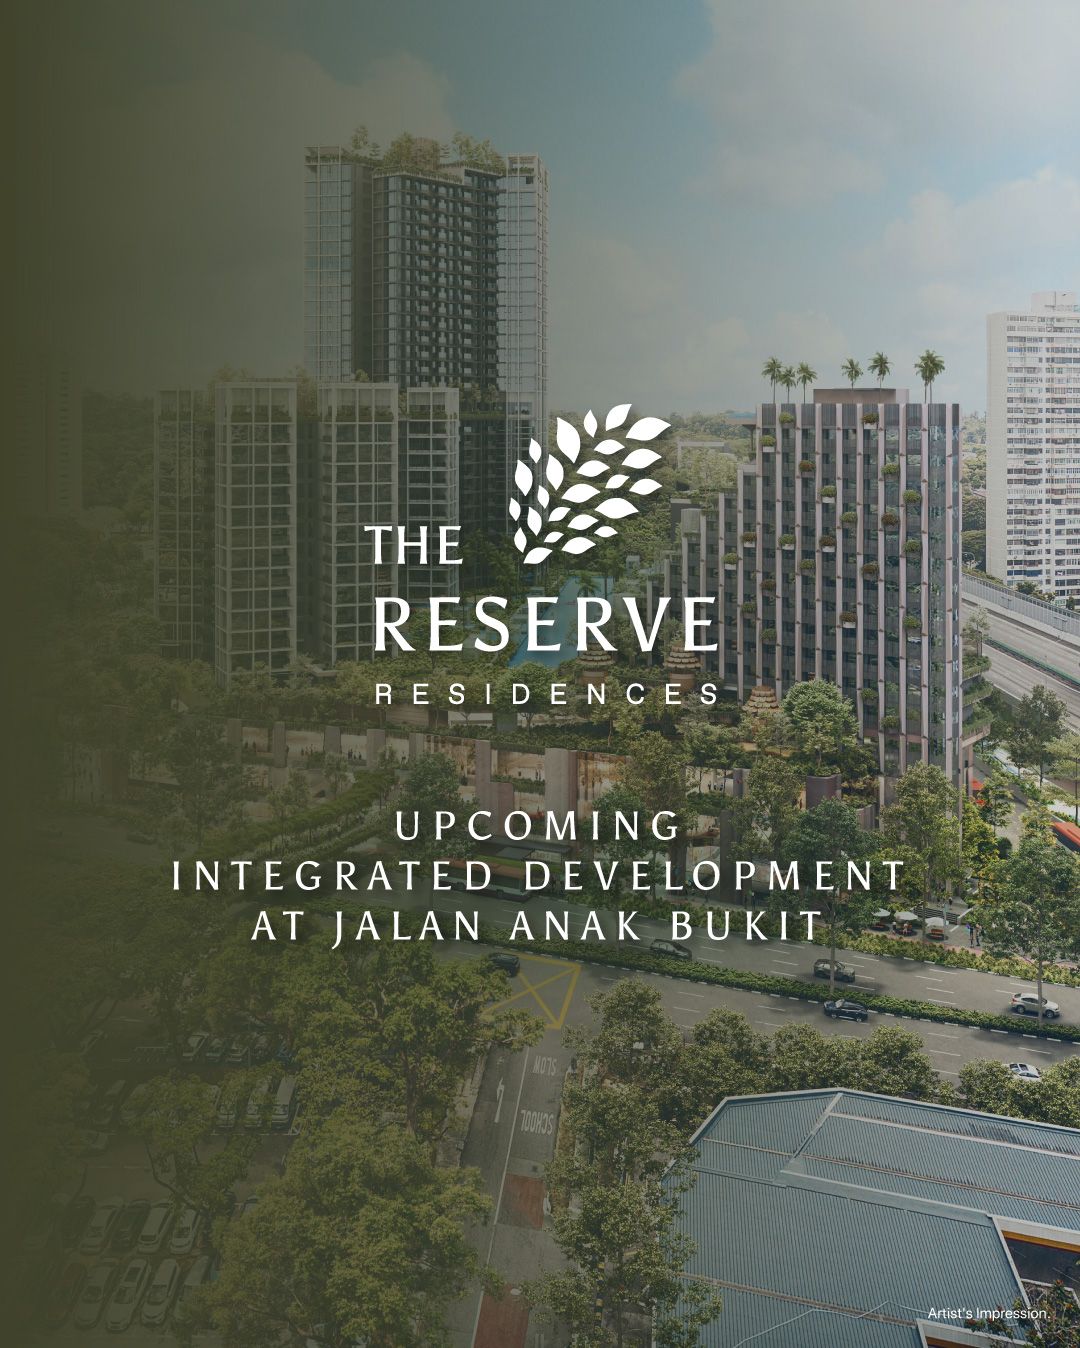 The Reserve Residences image